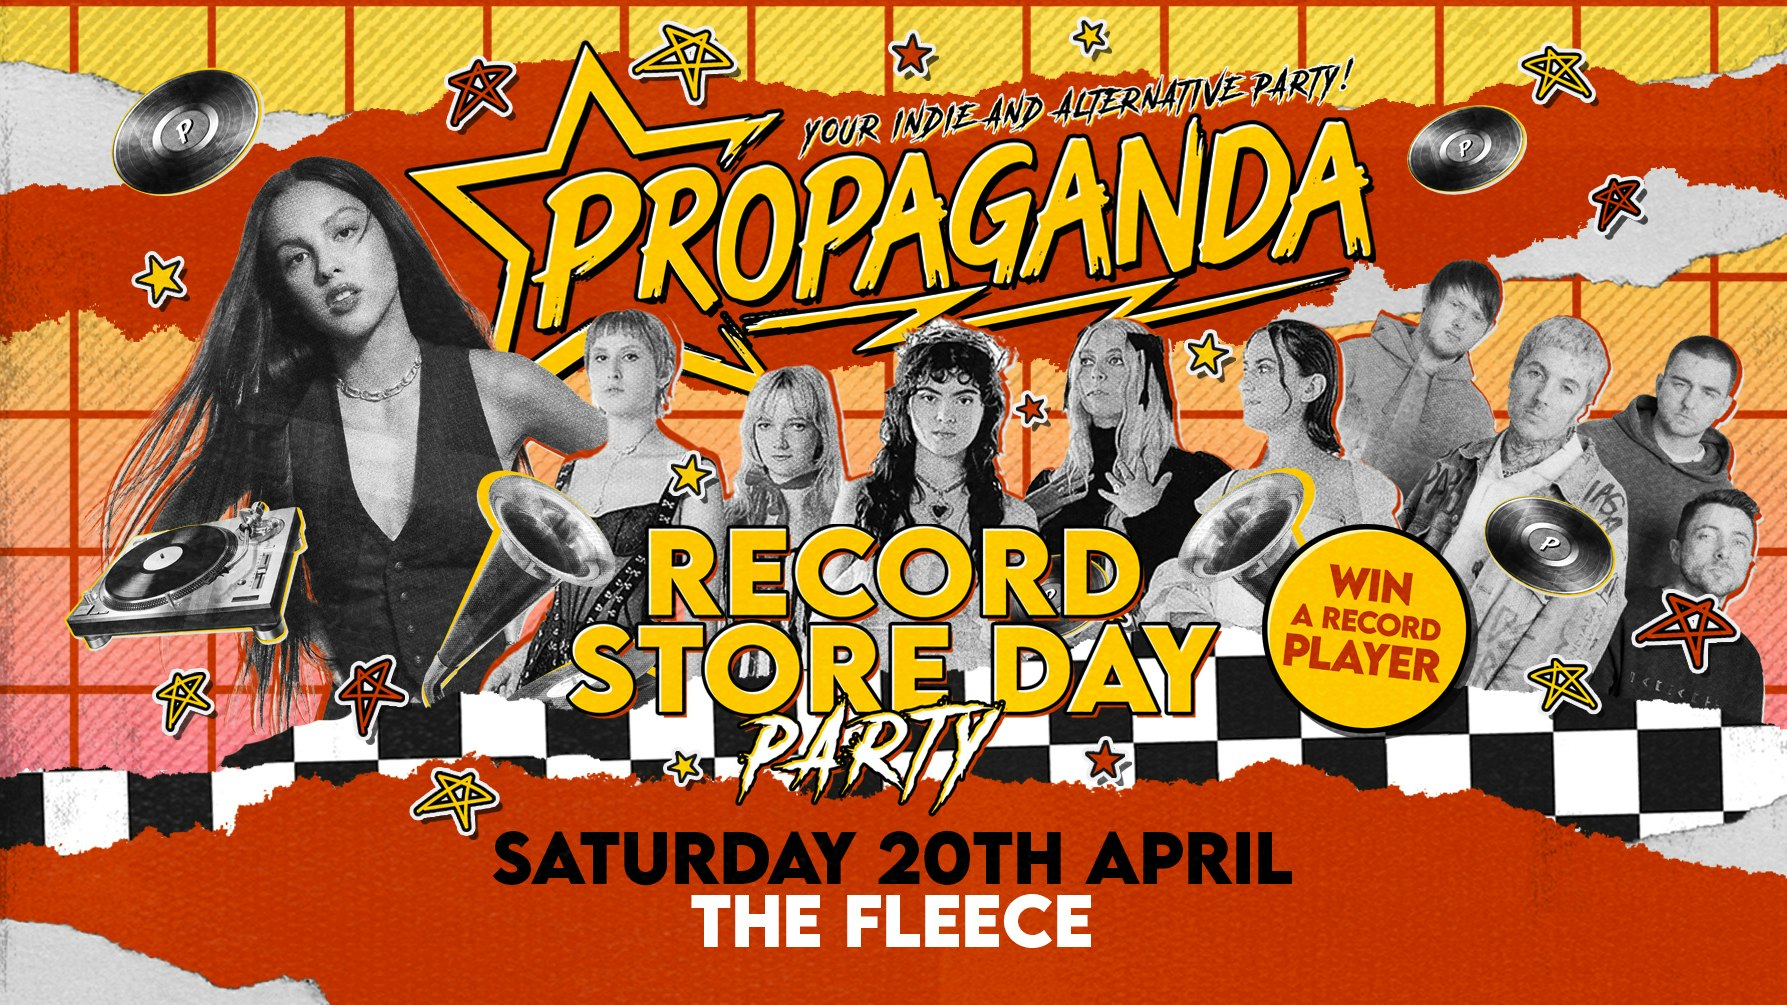 Propaganda Bristol Record Store Day Party! – Your Indie & Alternative Party!